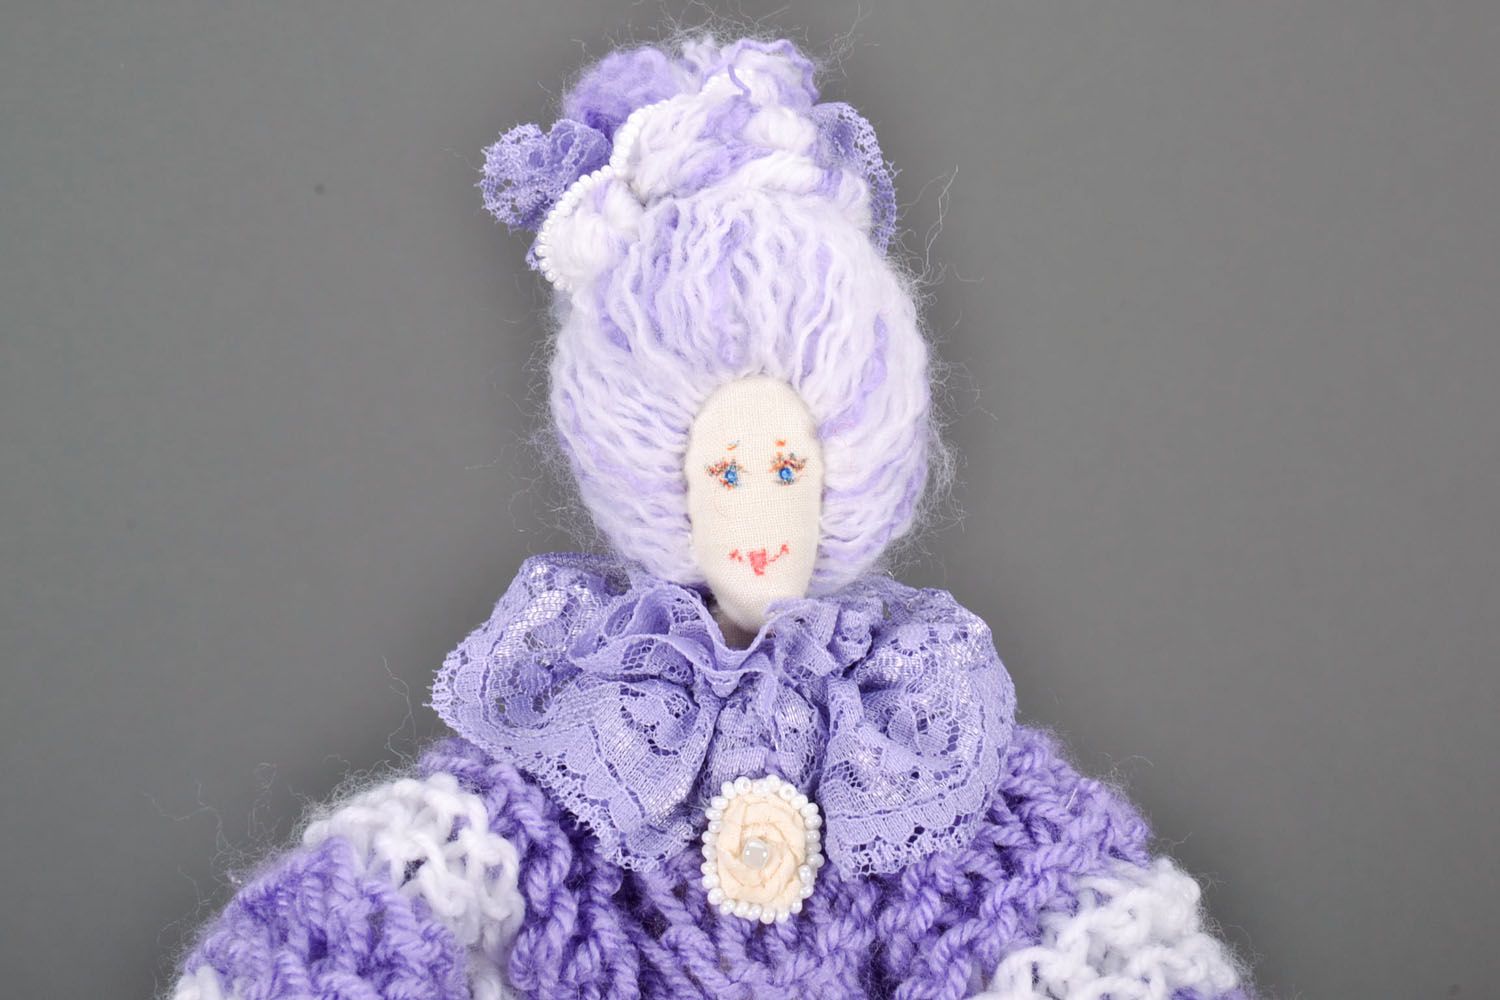 Knitted interior doll photo 2